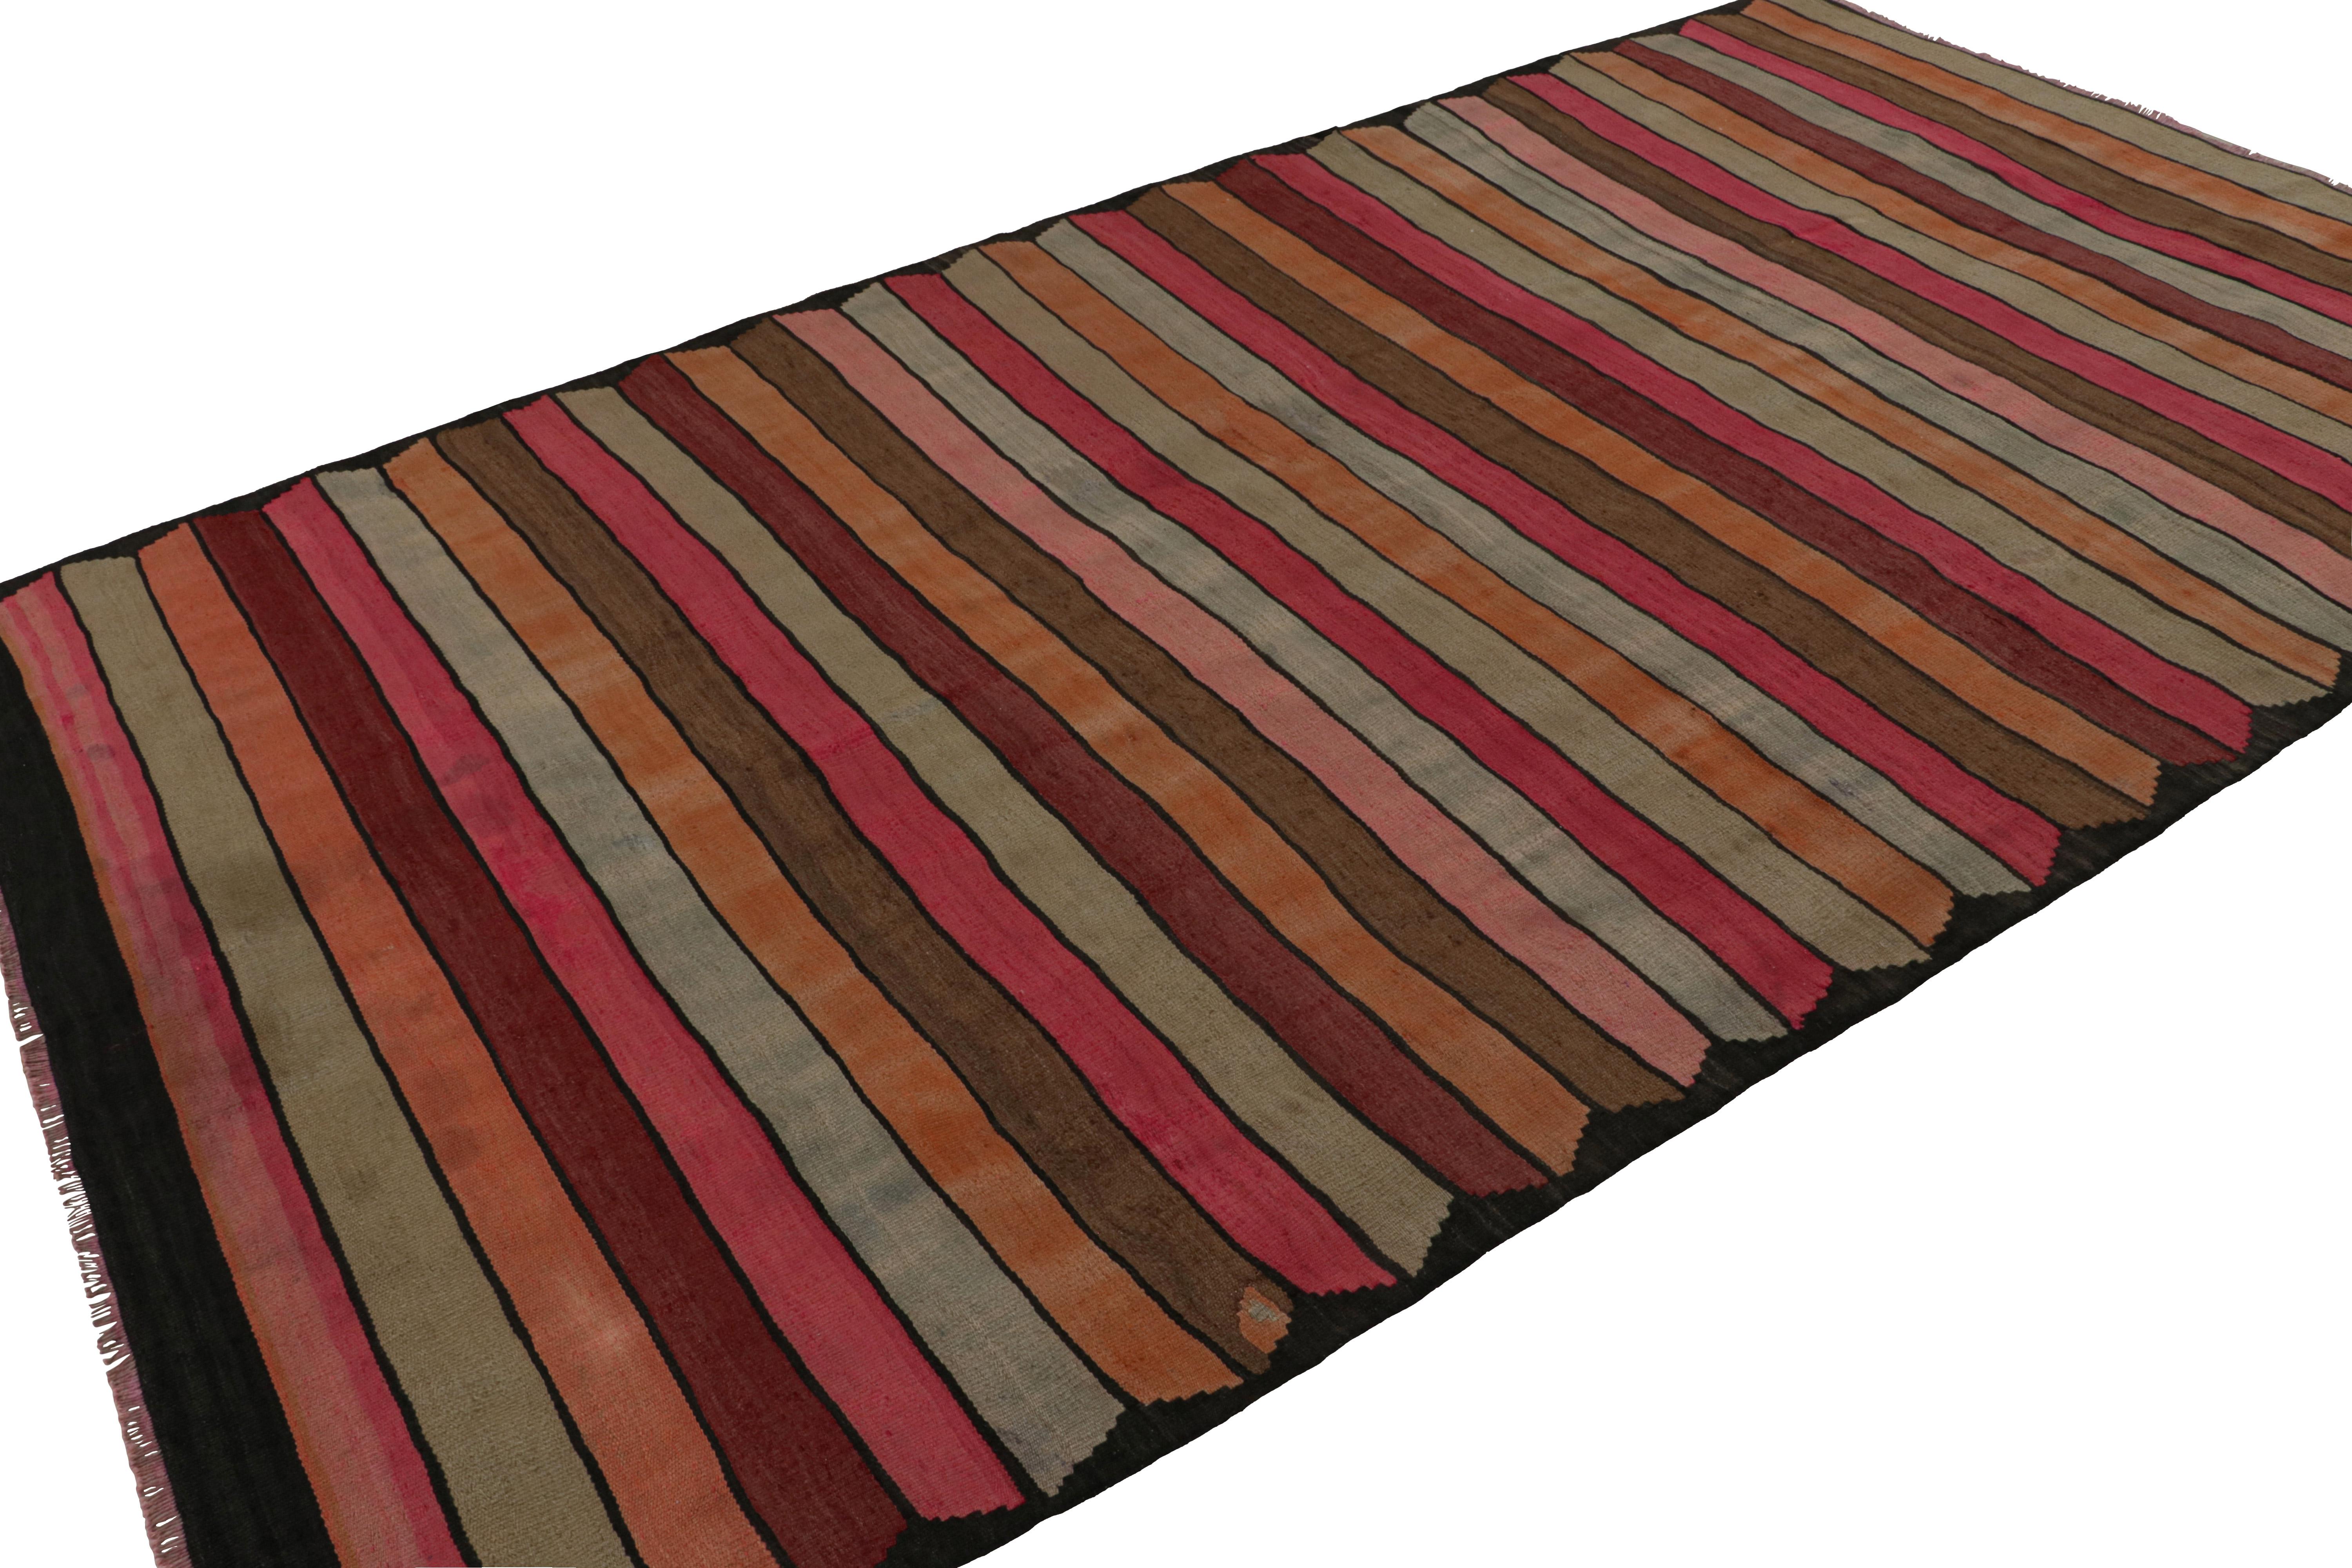 Featuring a play of colorful stripes in pink, orange, beige/brown and blue, this 6x9 vintage Persian tribal kilim rug, handwoven in wool, circa 1950-1960, portrays most likely a Northwest design. 

On the Design: 

Admirers of craft may note this